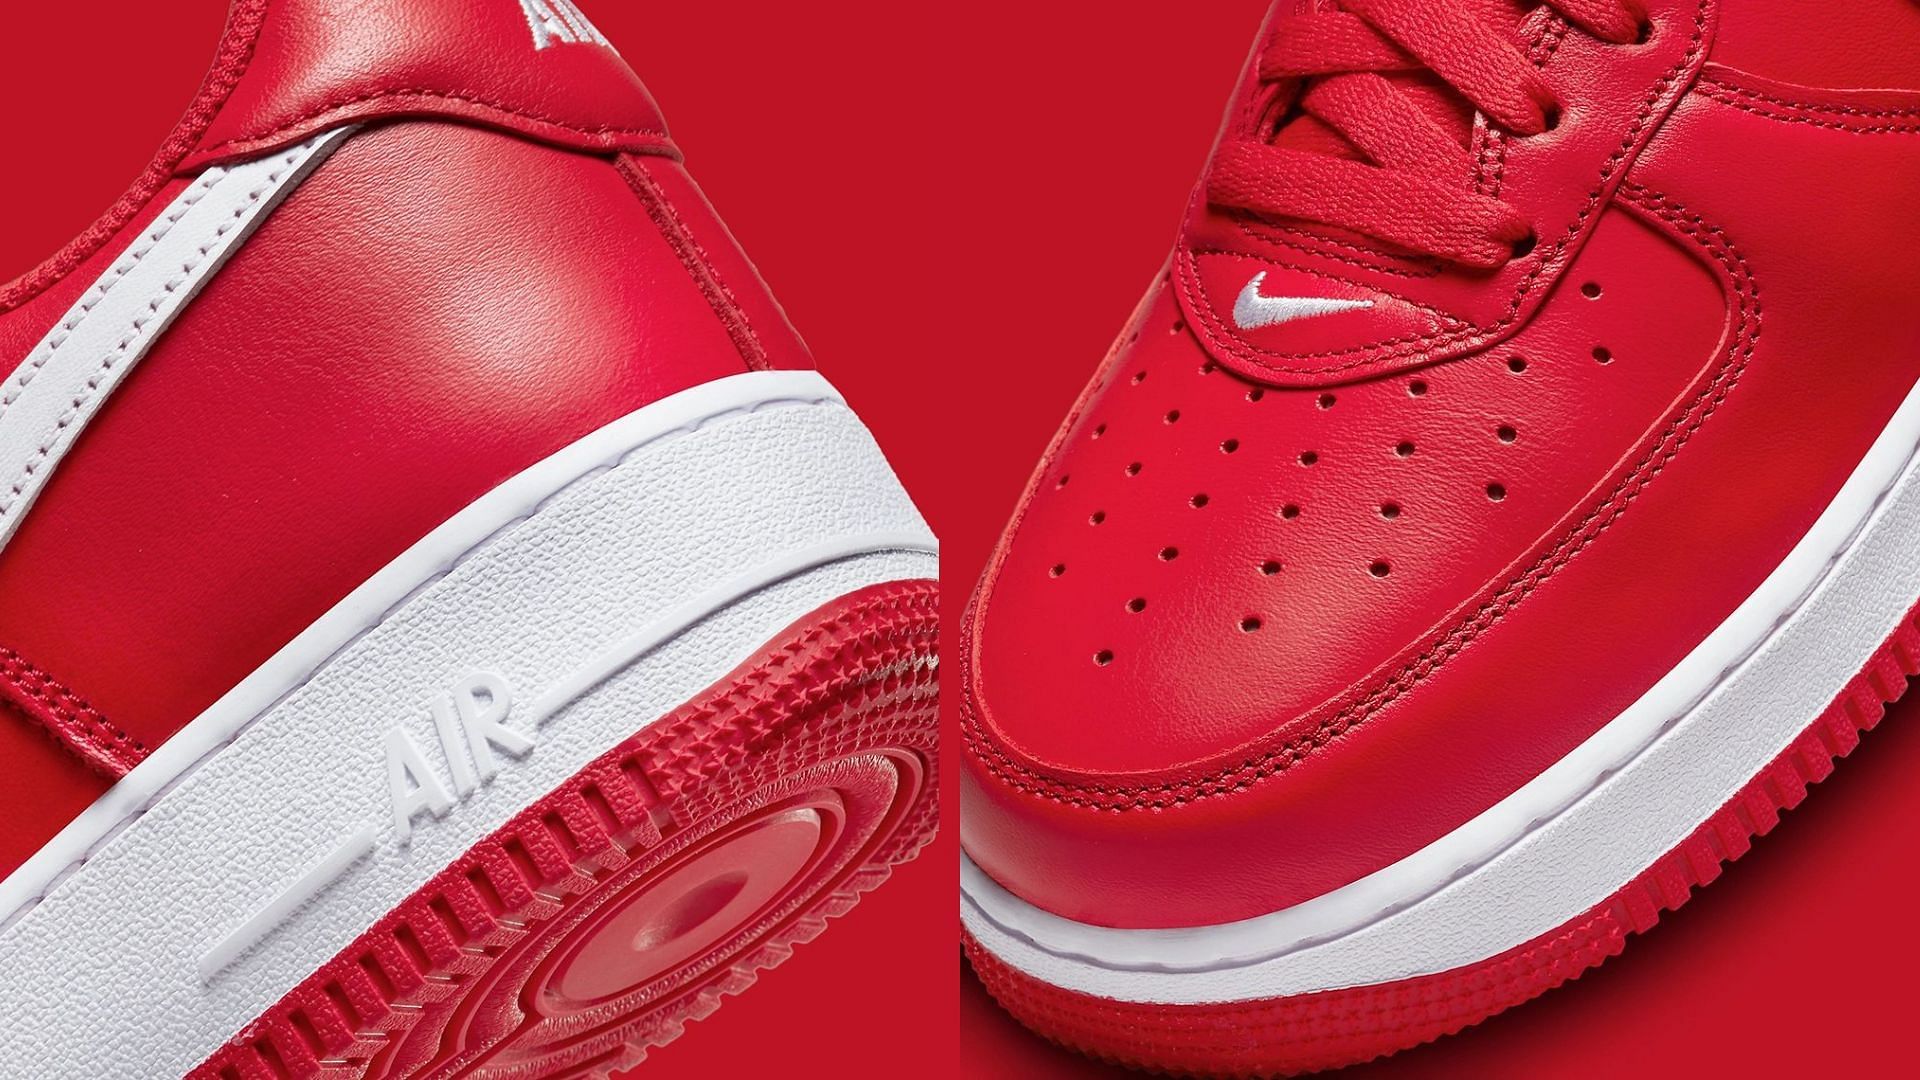 Take a closer look at the heels and toe tops of the Nike Air Force 1 Low shoes (Image via Nike)